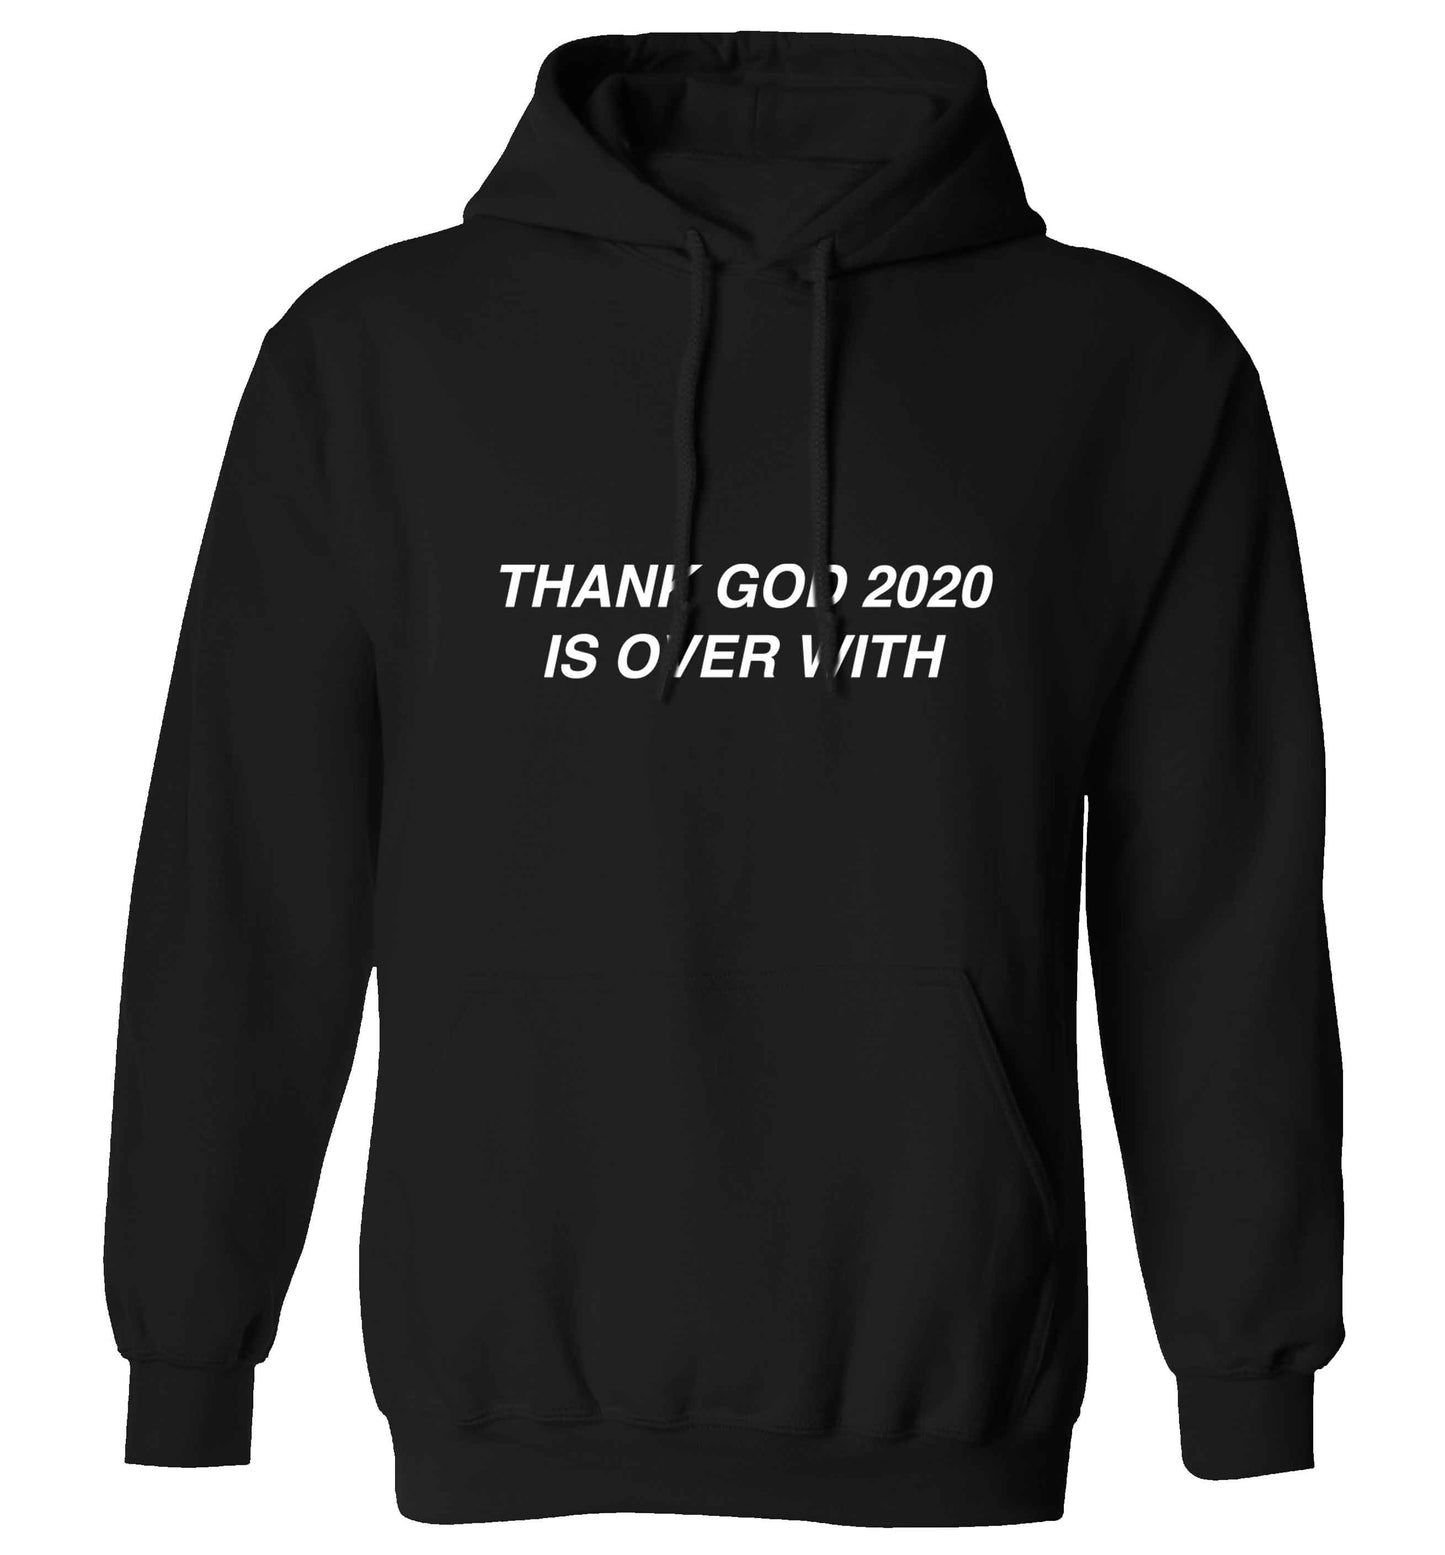 Thank god 2020 is over with adults unisex black hoodie 2XL